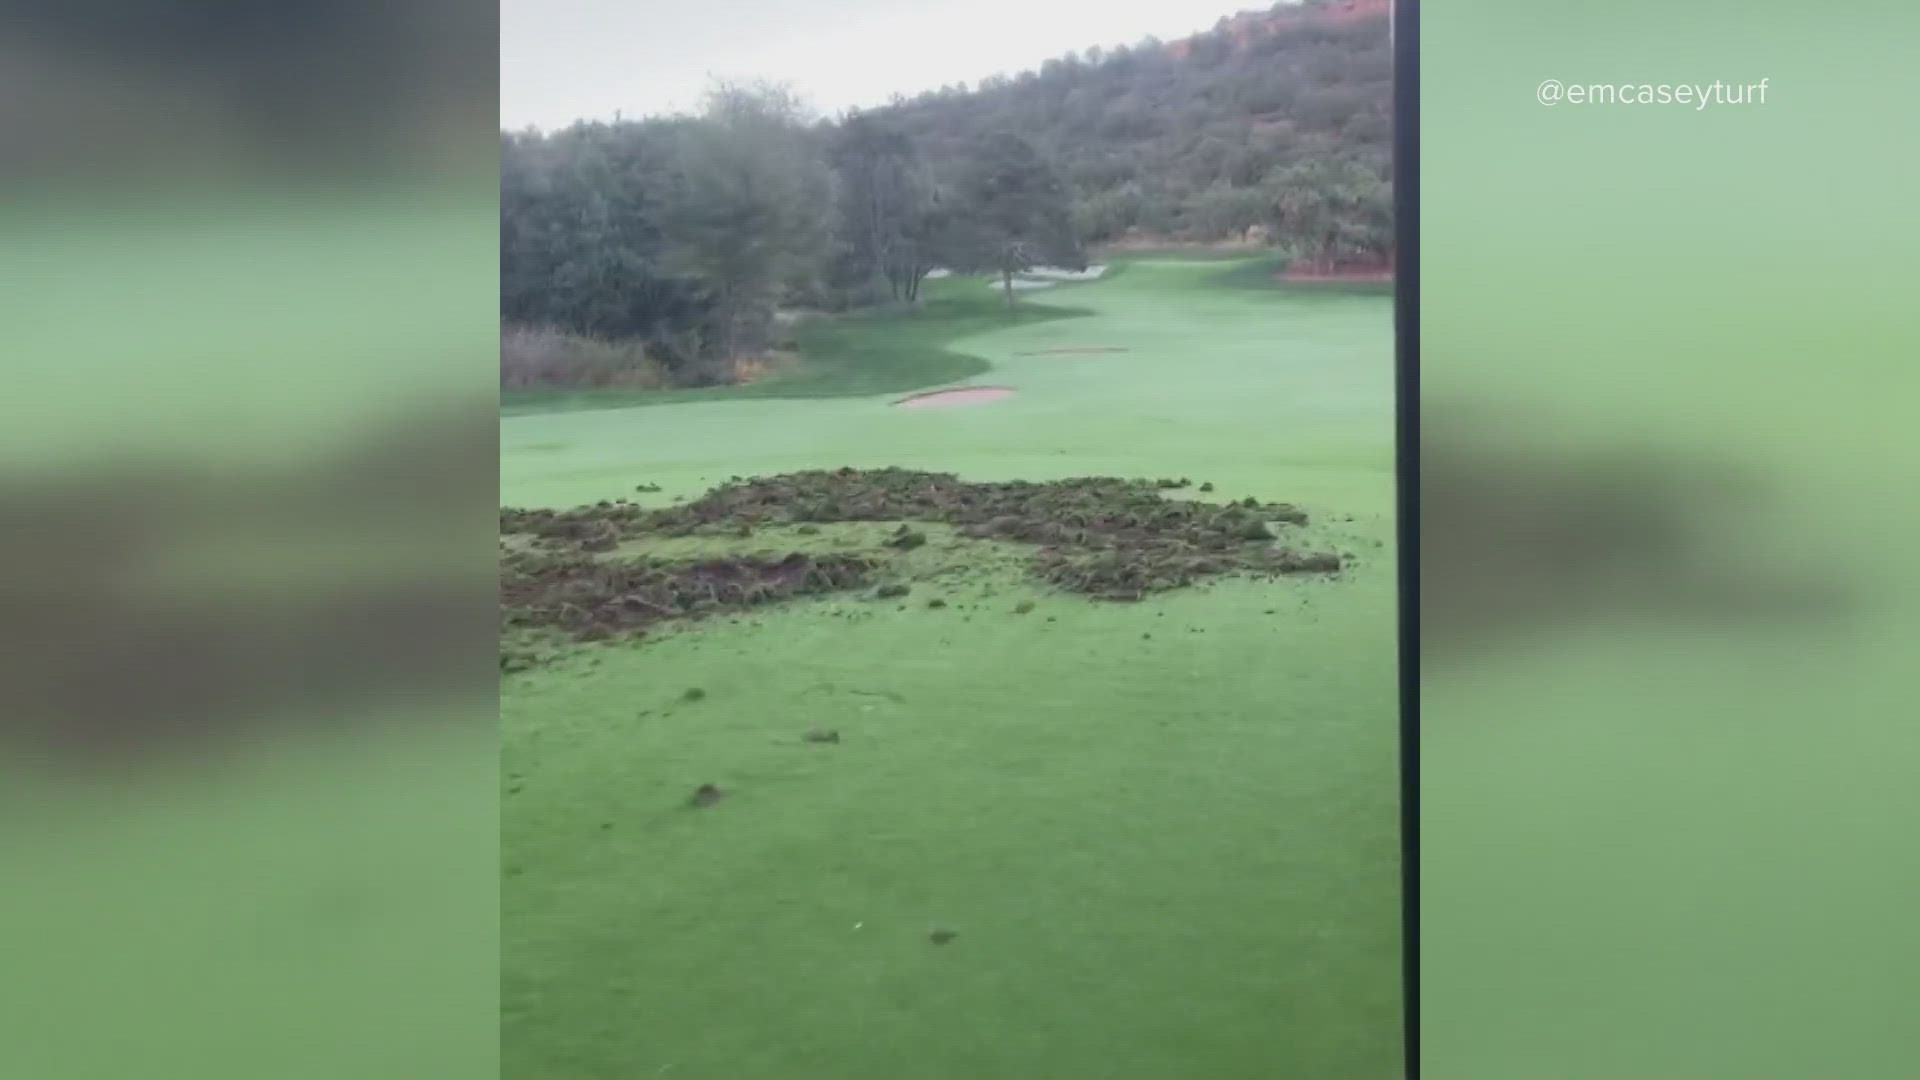 The damage done to the course is taking quite a long time to repair, the owner said.